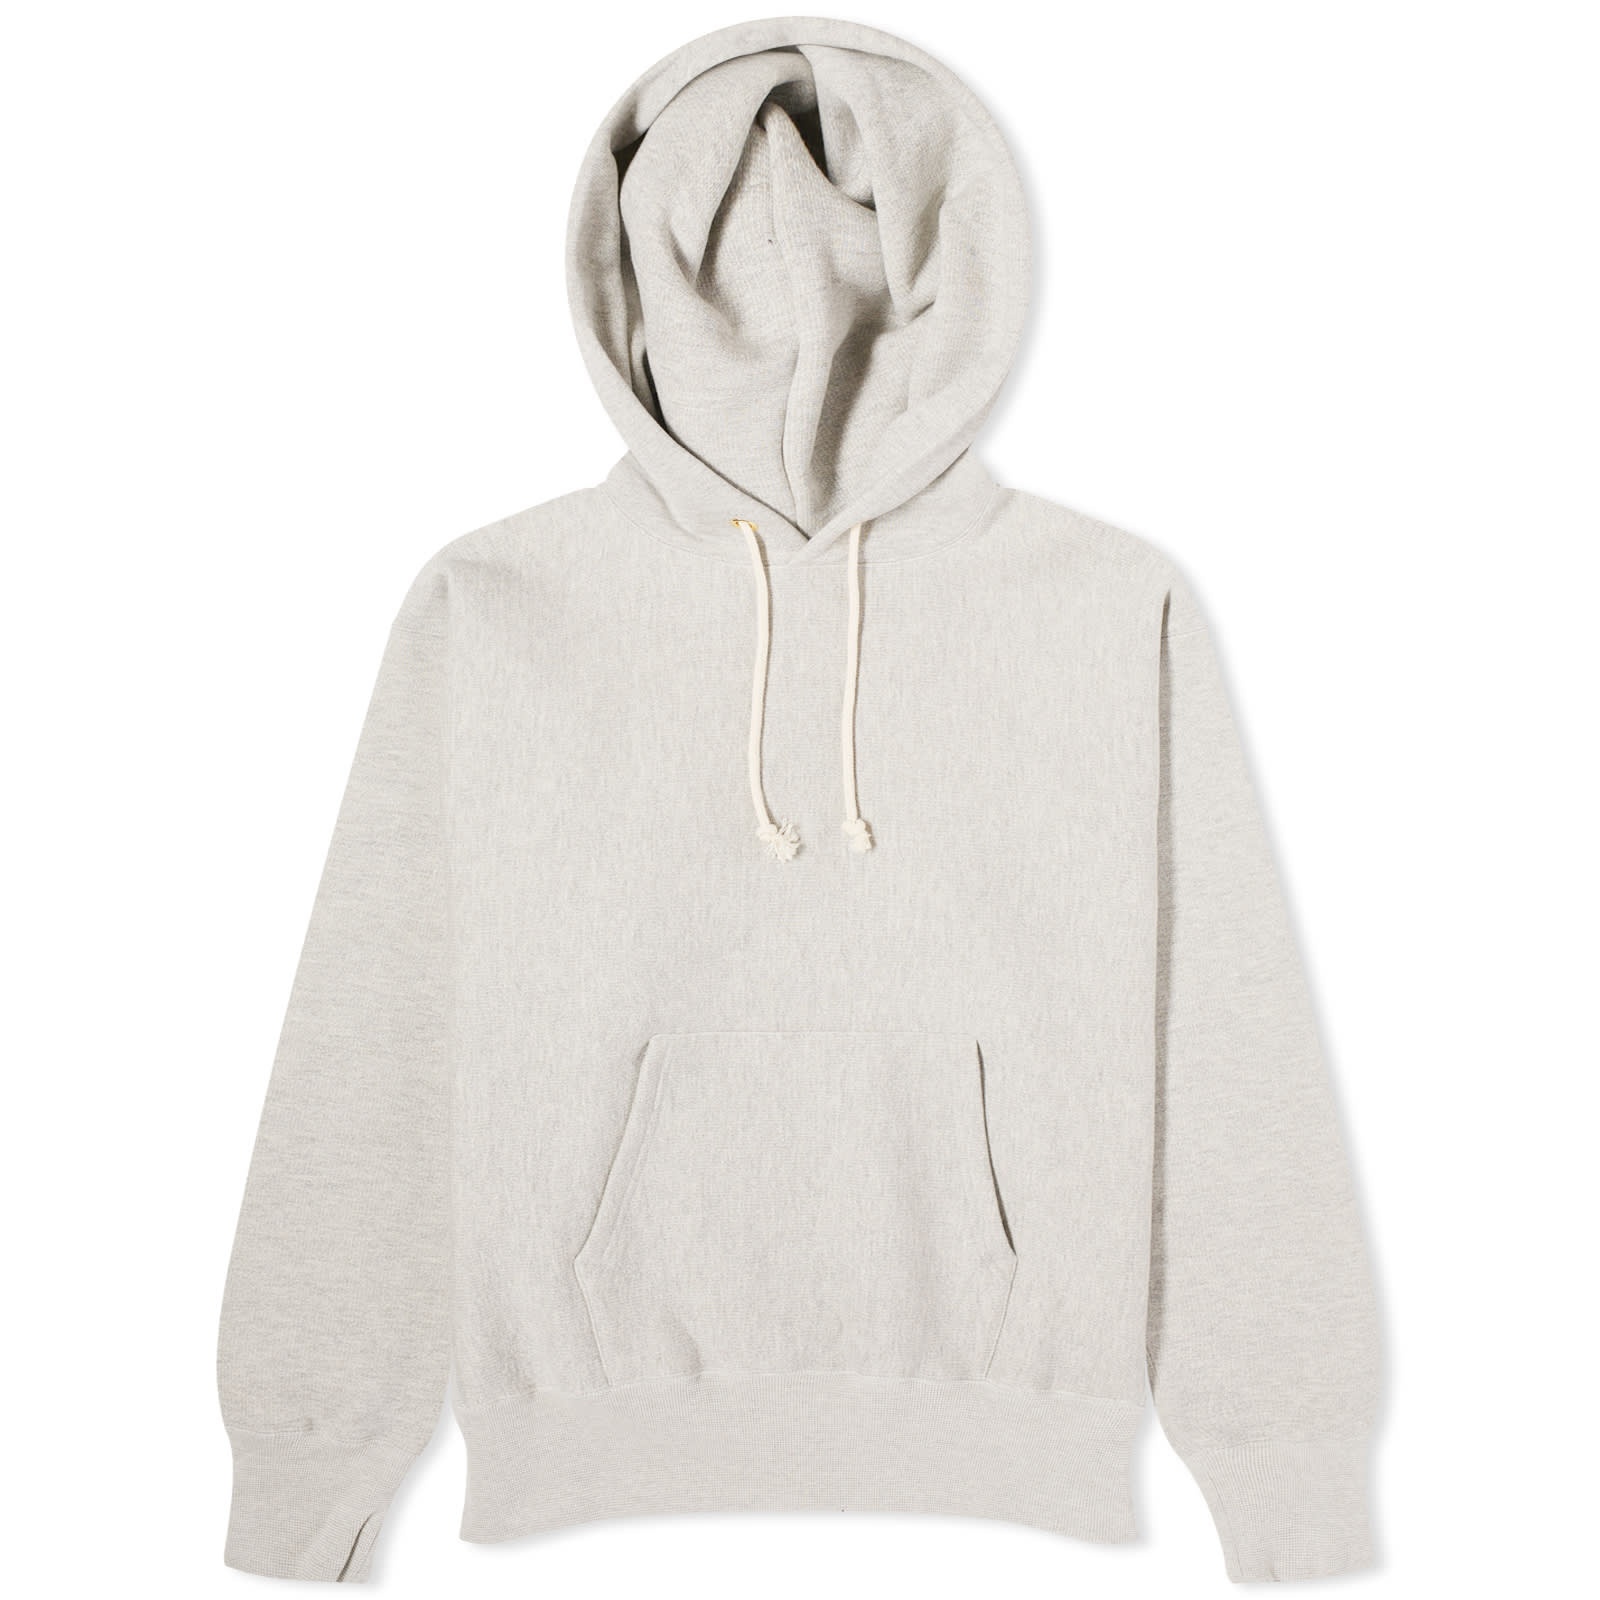 Champion Made in Japan Hoodie - 1